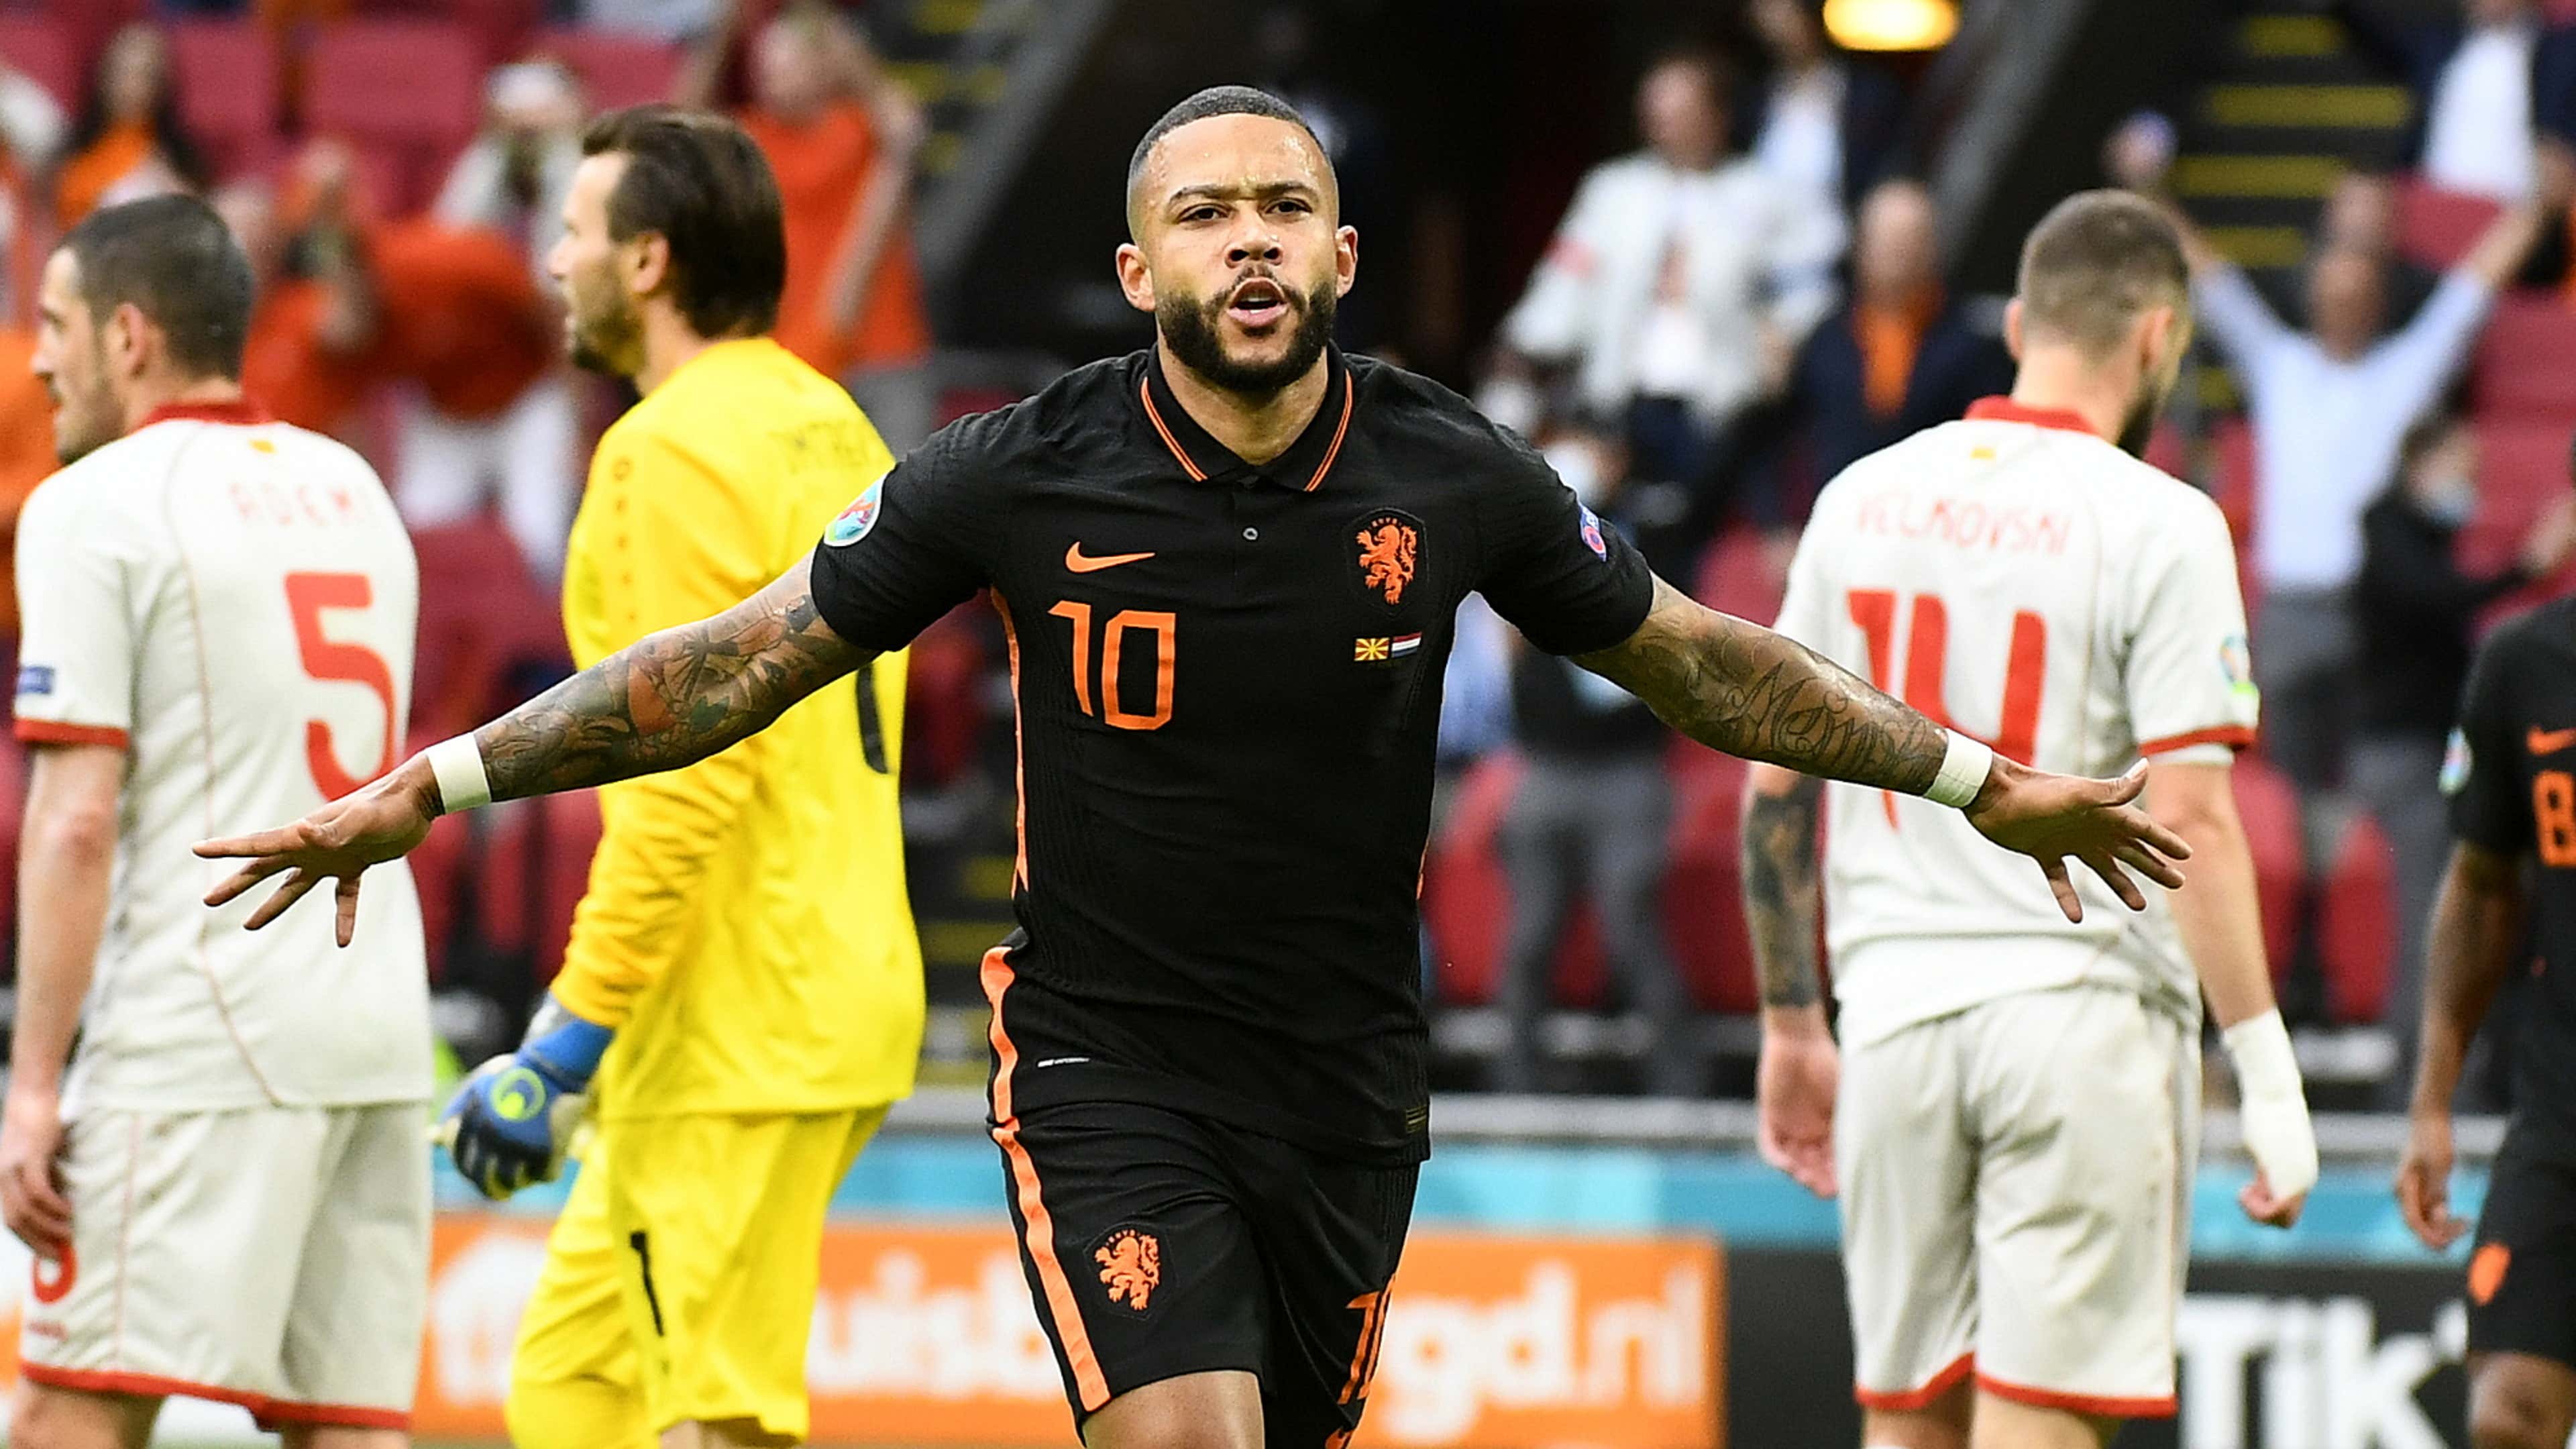 Memphis Depay is now the second highest goal scorer in the history